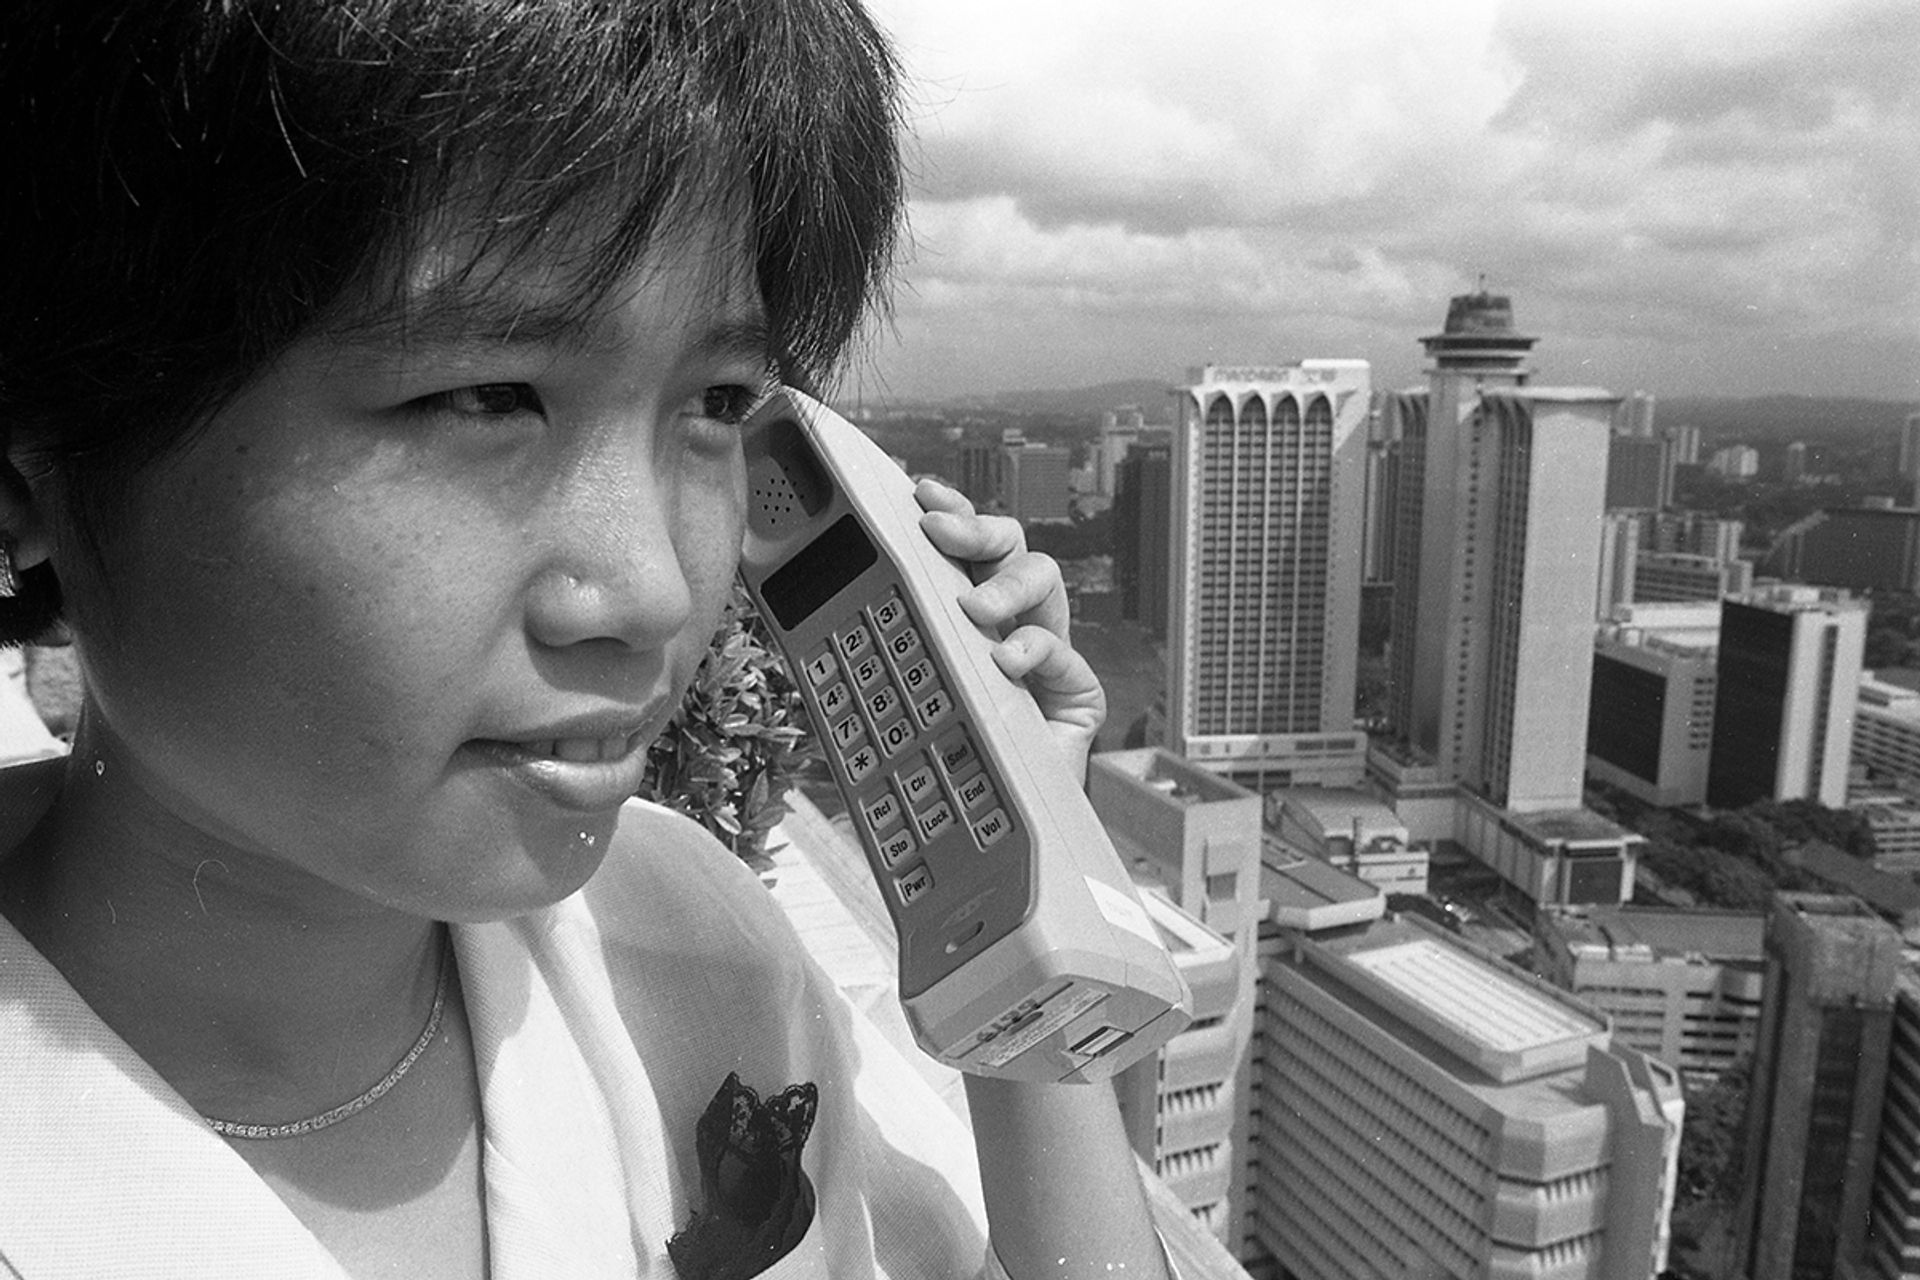 Telecoms officer Yen Ee Wen holding the brick phone in this photo taken on Aug 15, 1988. ST FILE PHOTO: YAP YEW PIANG